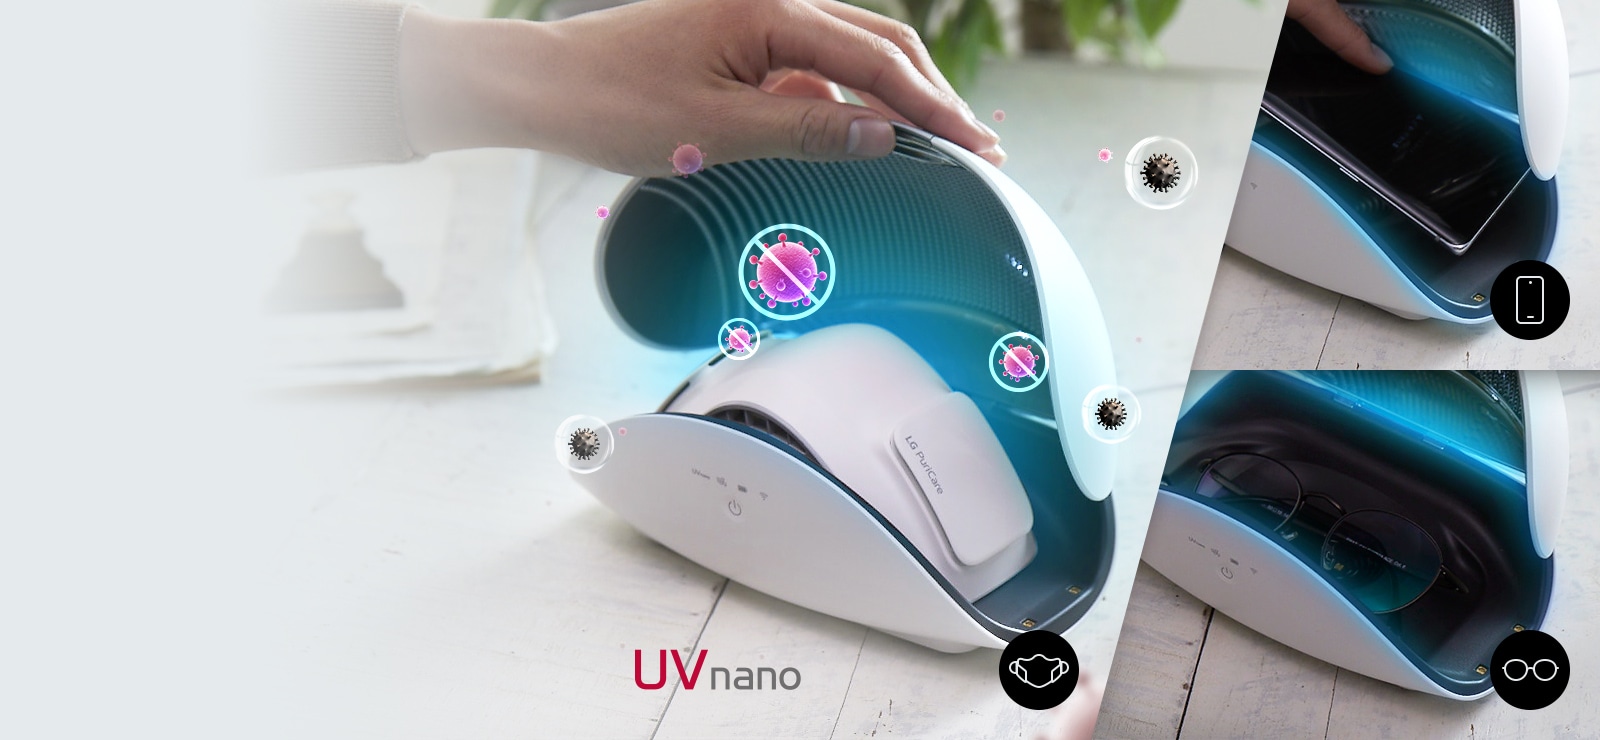 A hand holds open the lid of the purifier case to show the LG PuriCare Wearable Air Purifier sitting inside. Bacteria icons crossed out float nearby indicating there are being Removed. The UV Nano logo is at the center bottom.